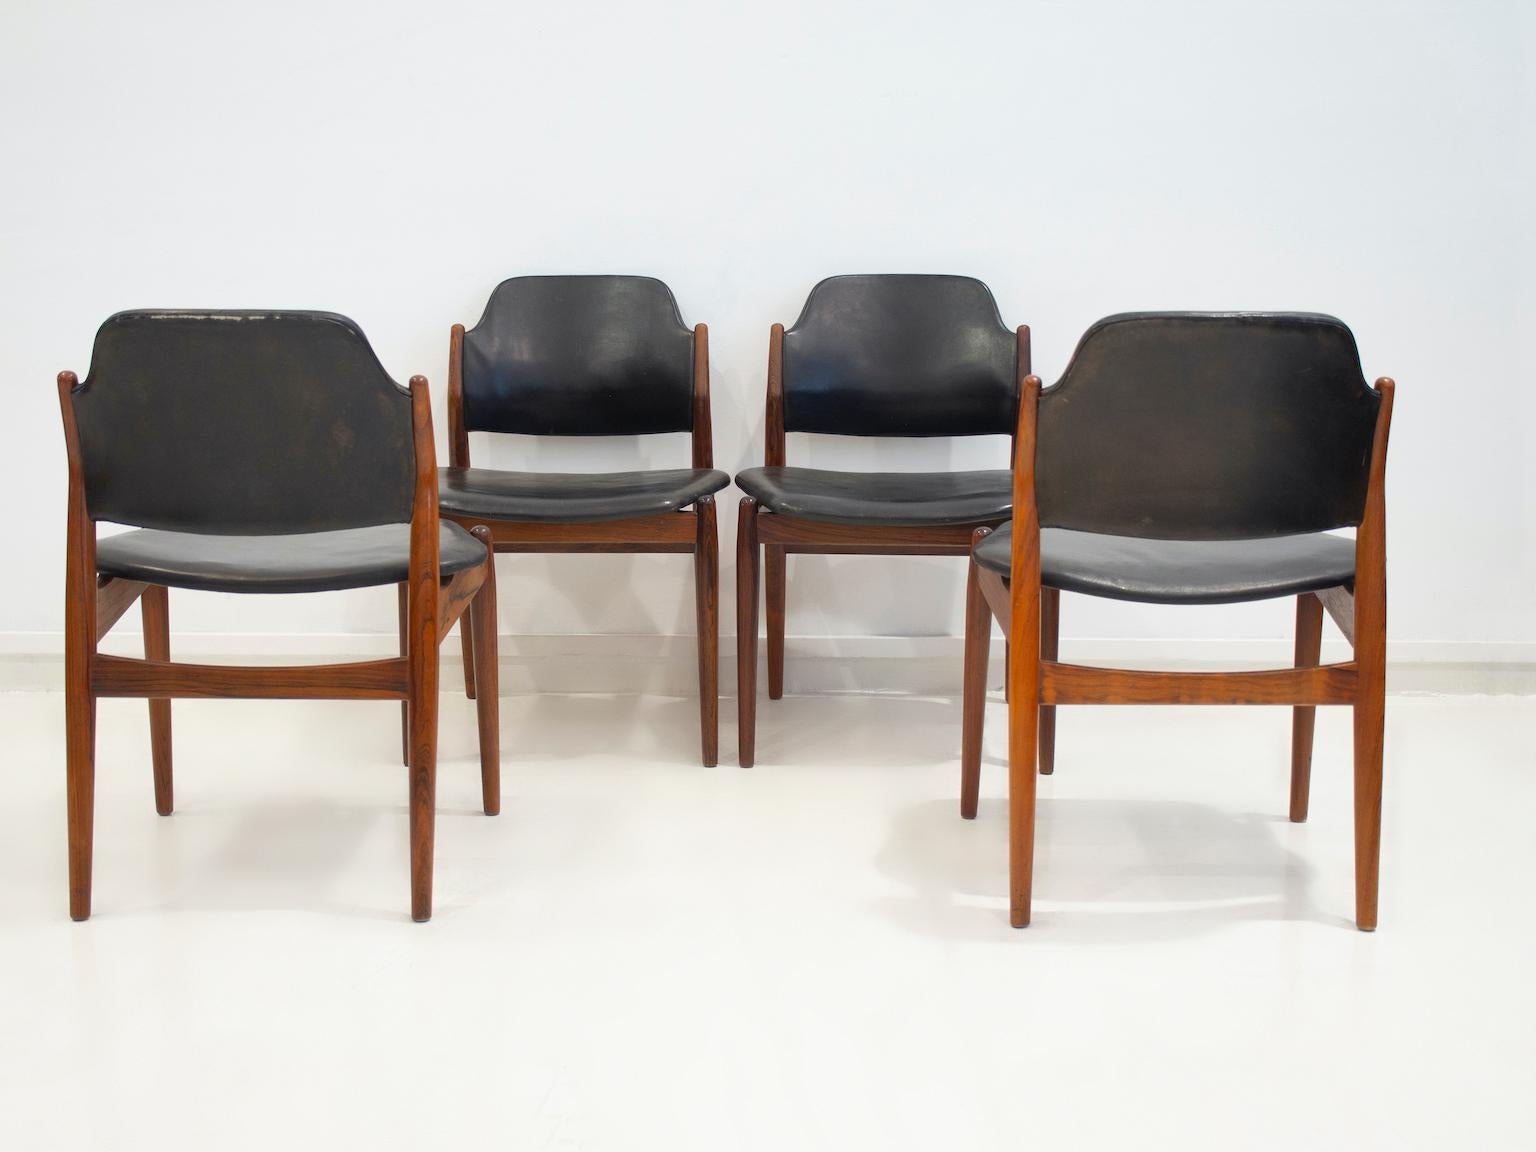 20th Century Set of Four Arne Vodder Hardwood and Black Leather Chairs